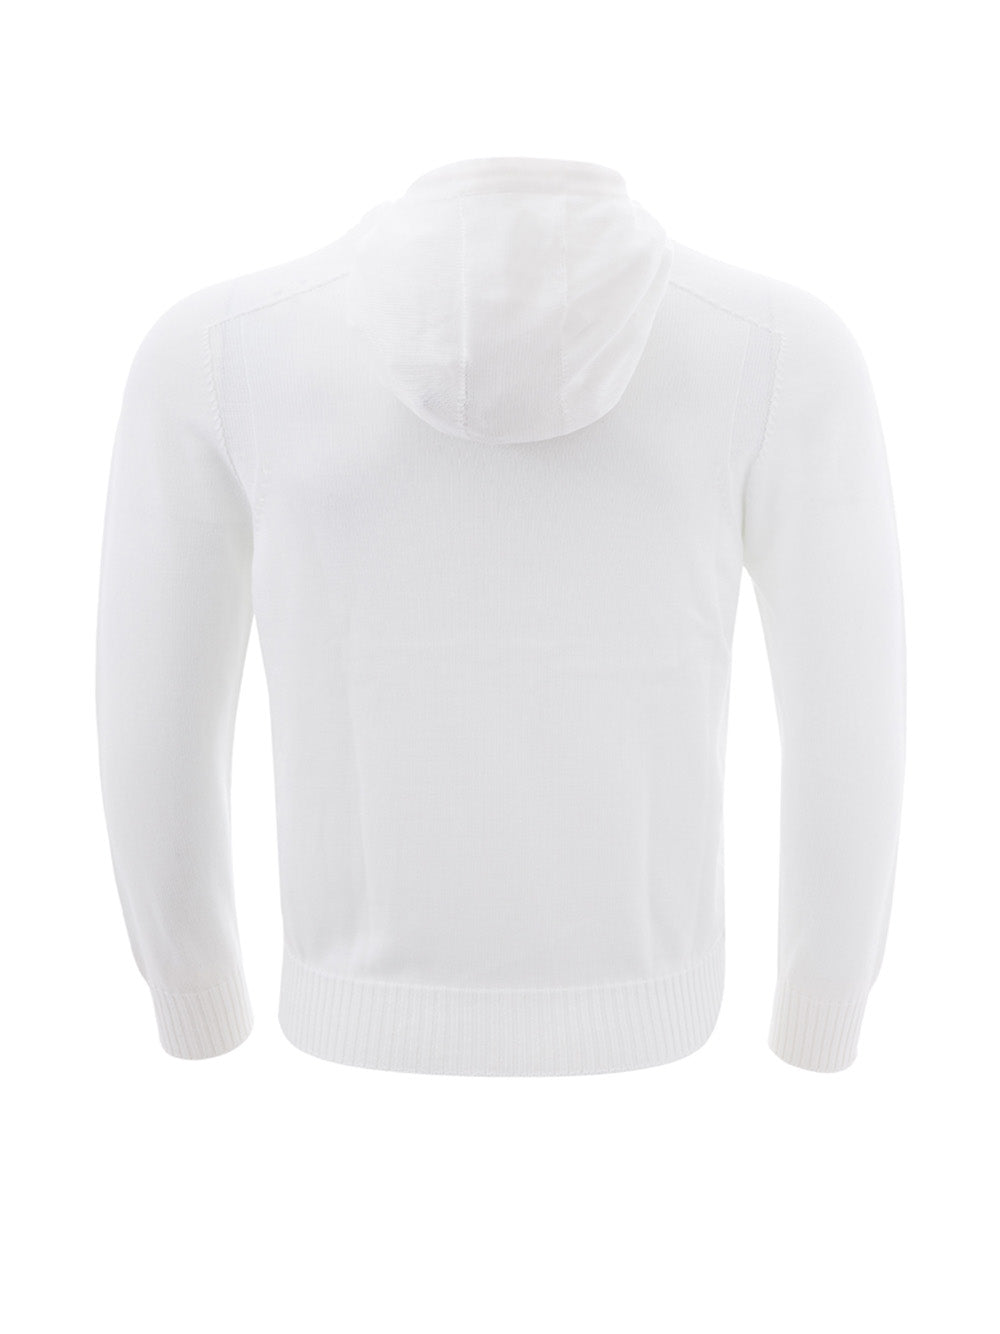 White Cotton Hooded and Full Zip Sweater